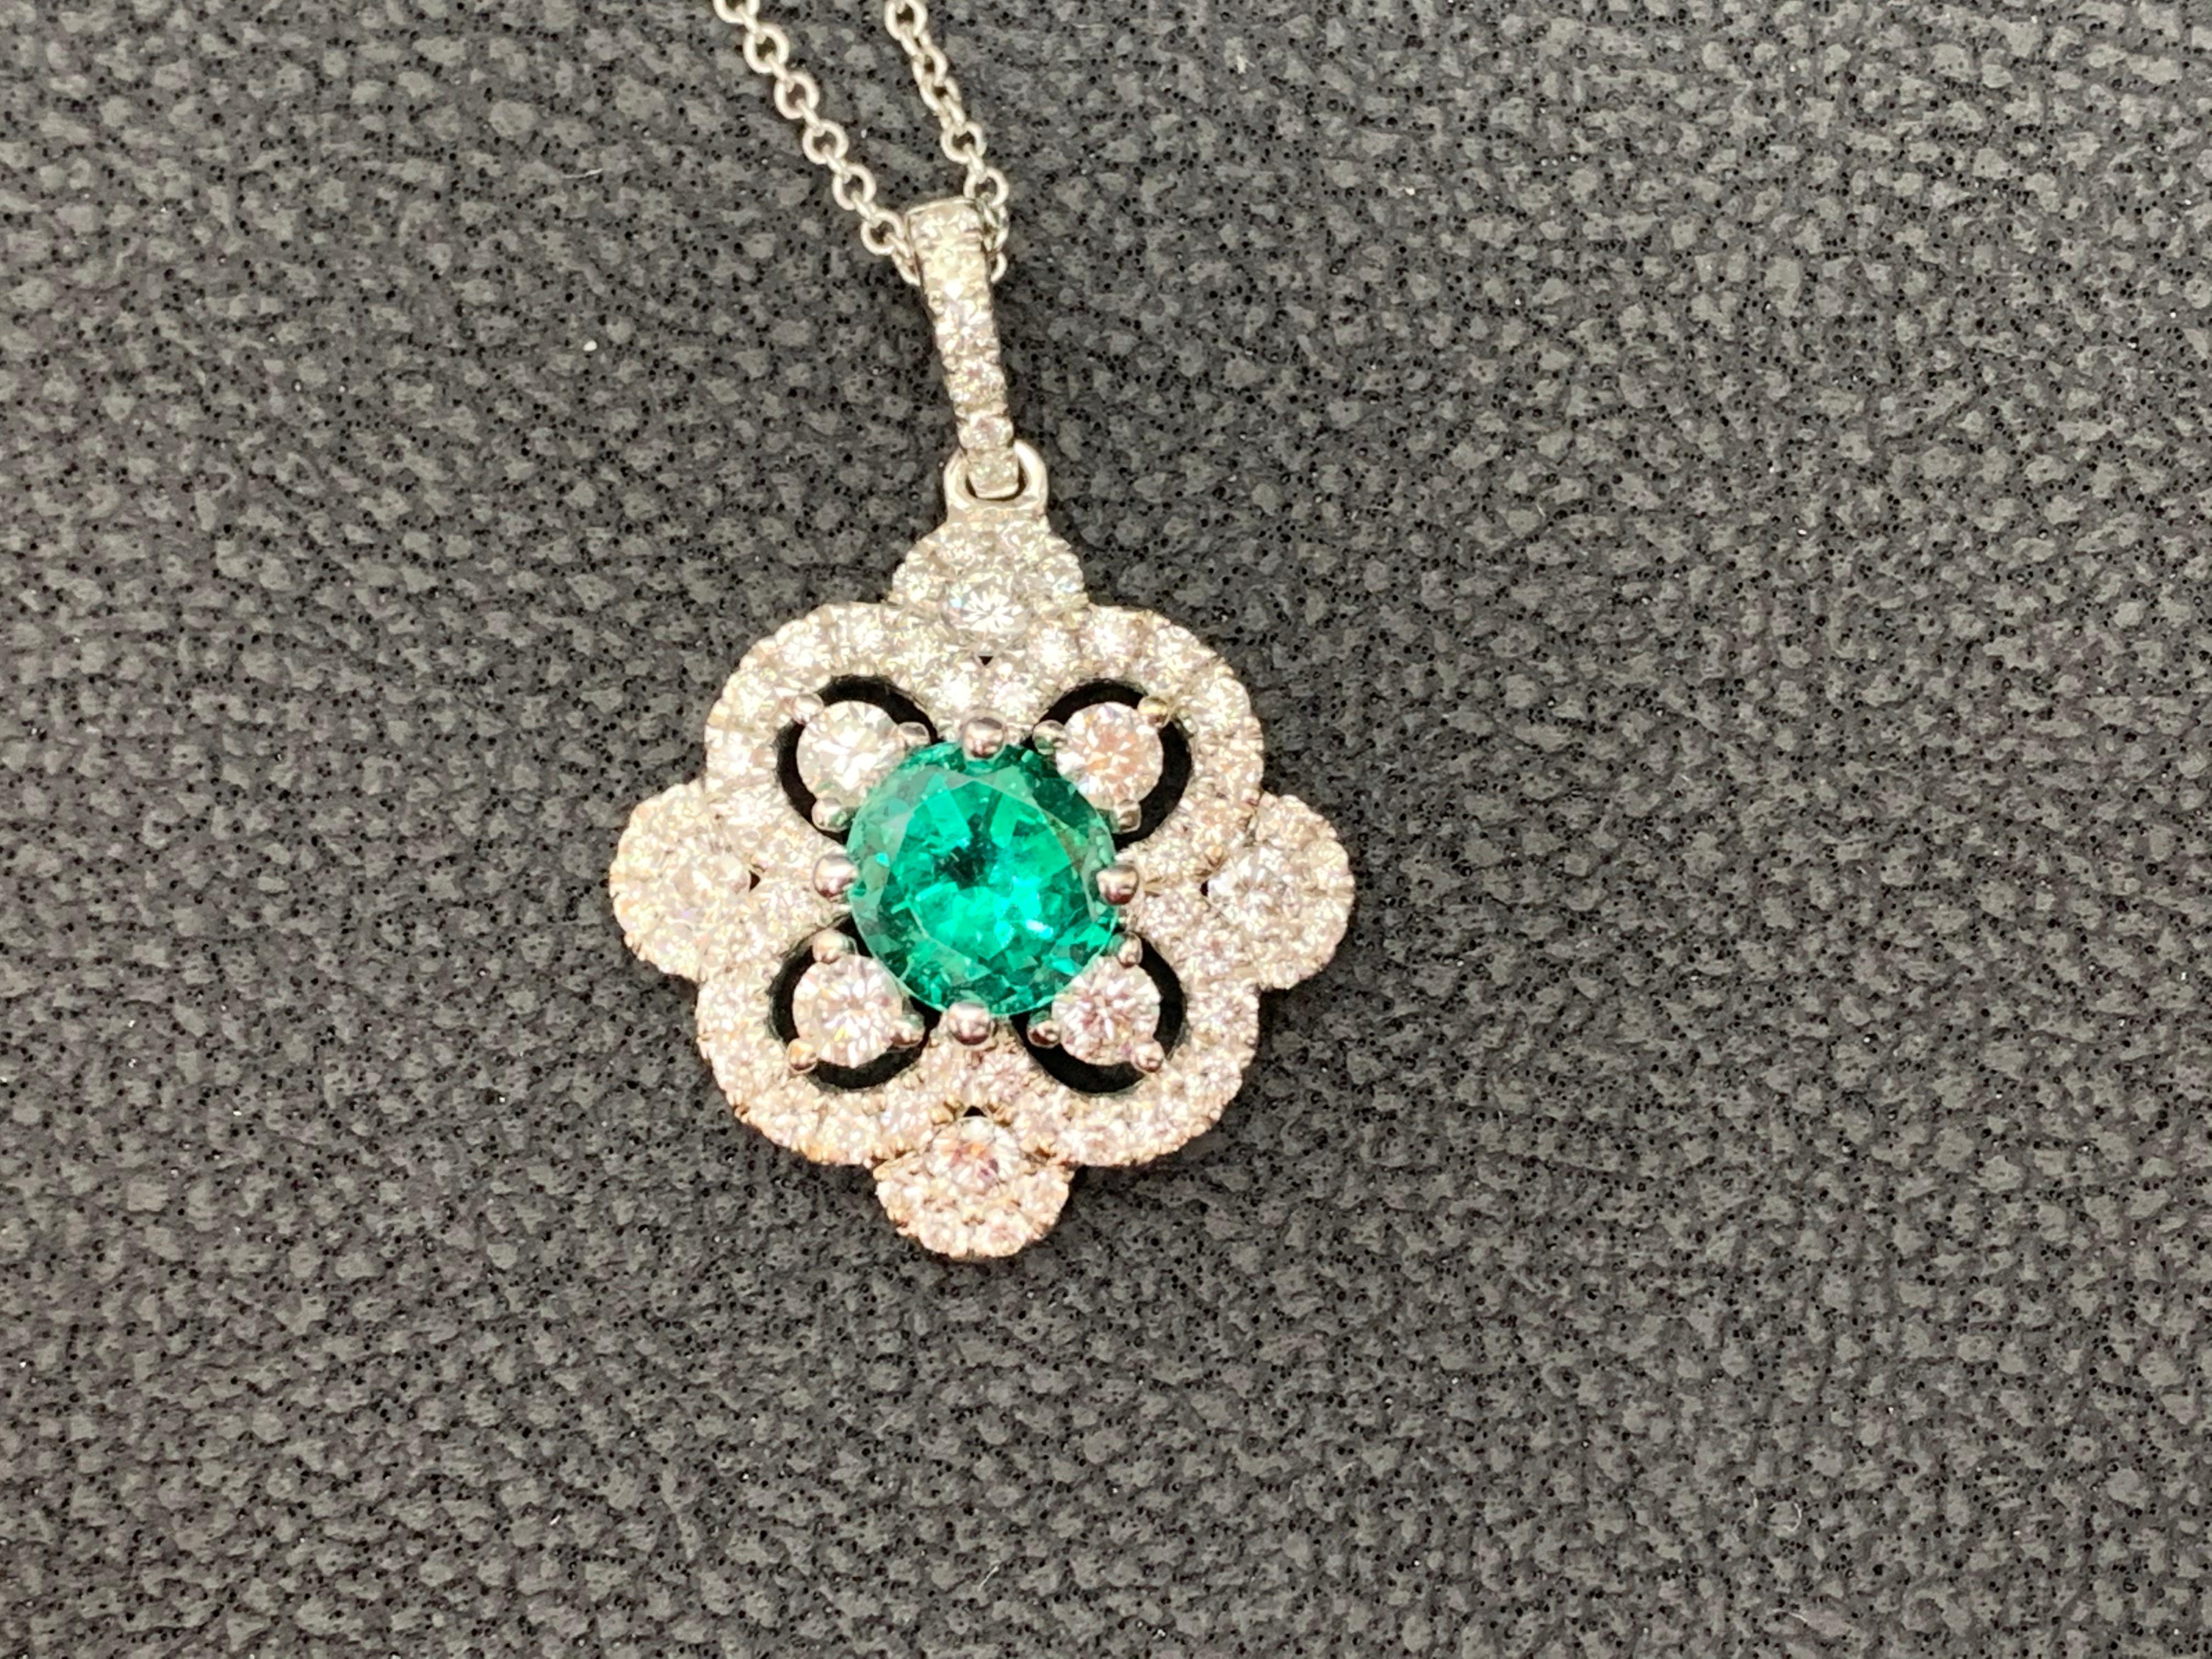 Set with a round green emerald center stone accented by 4 round shape brilliant diamonds on each corner. Each 4 diamonds are set in an open work semi-circles set with Diamonds. Finished with another open-work design with diamonds. Weight of diamonds